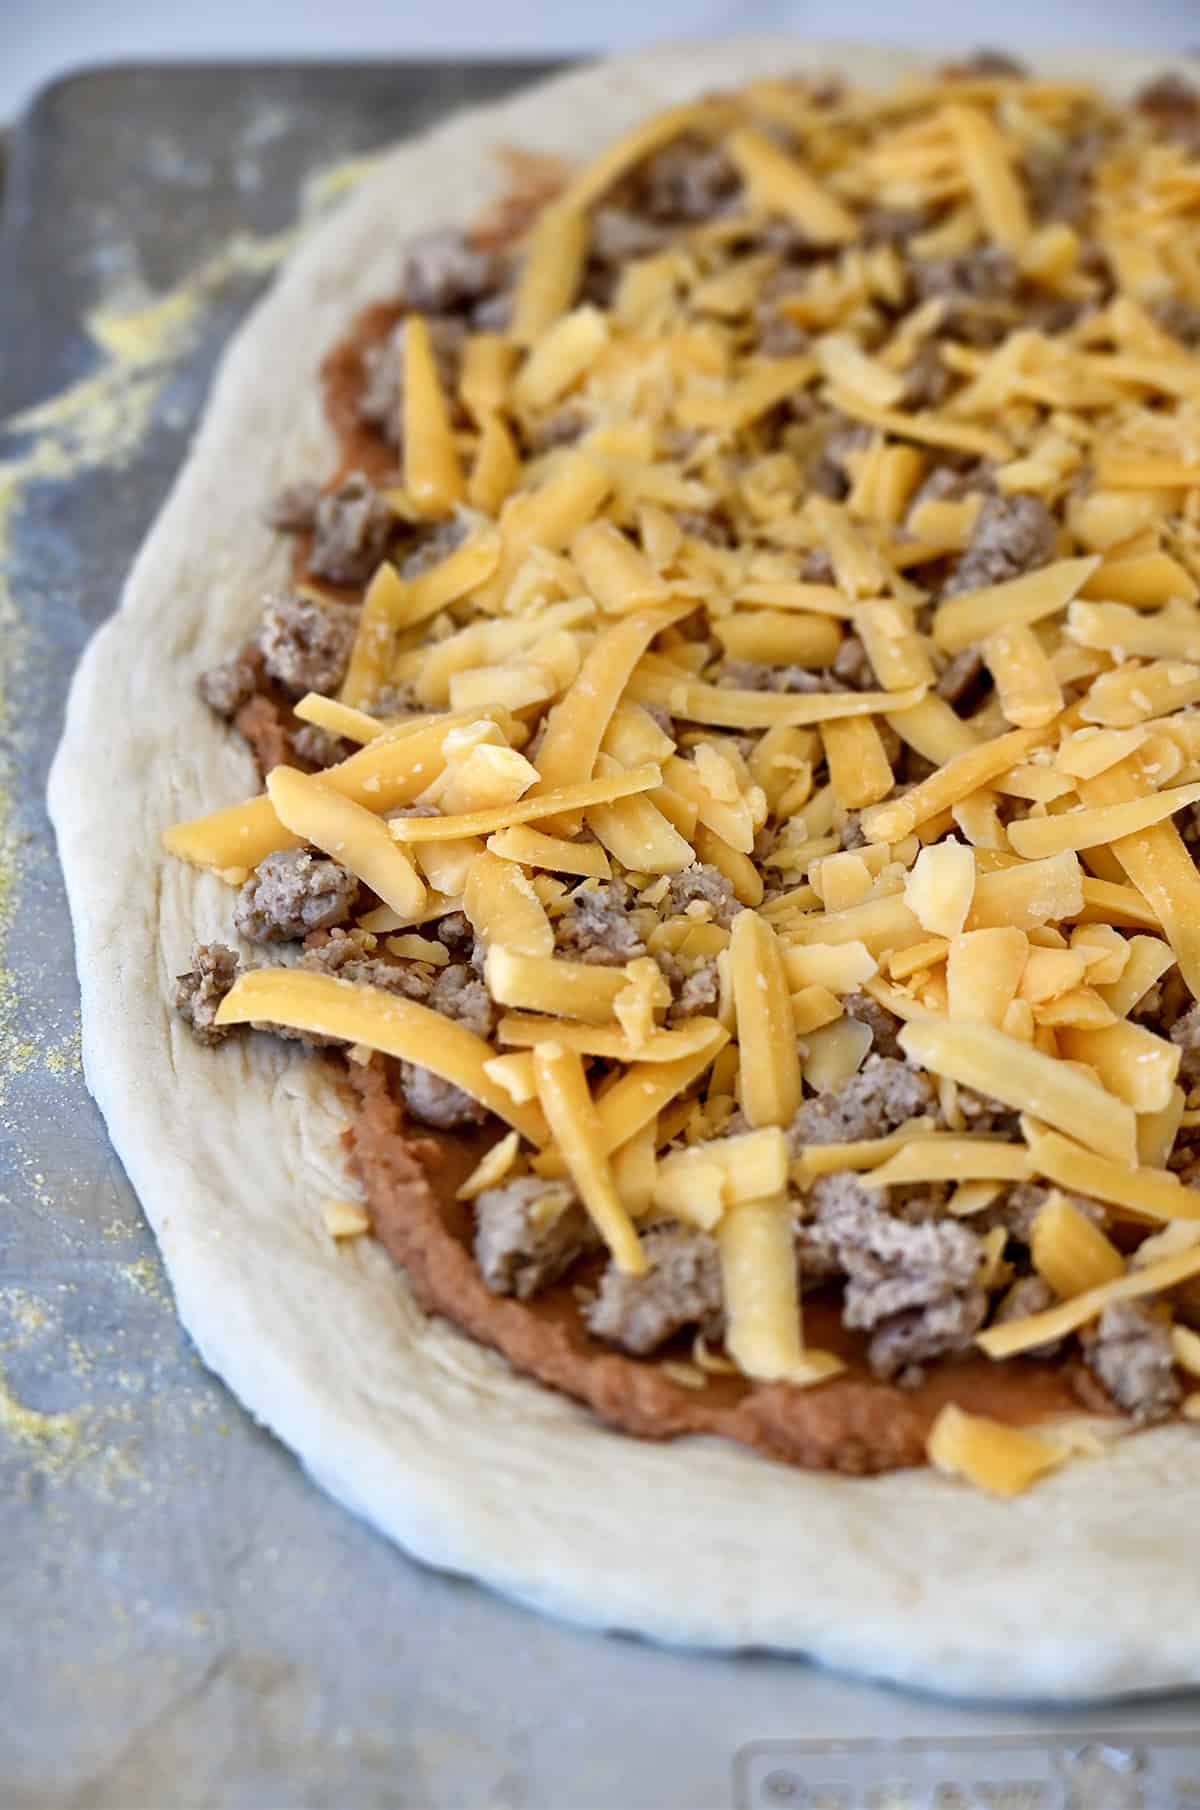 Pizza dough topped with refried beans, cooked taco meat and shredded cheddar cheese.